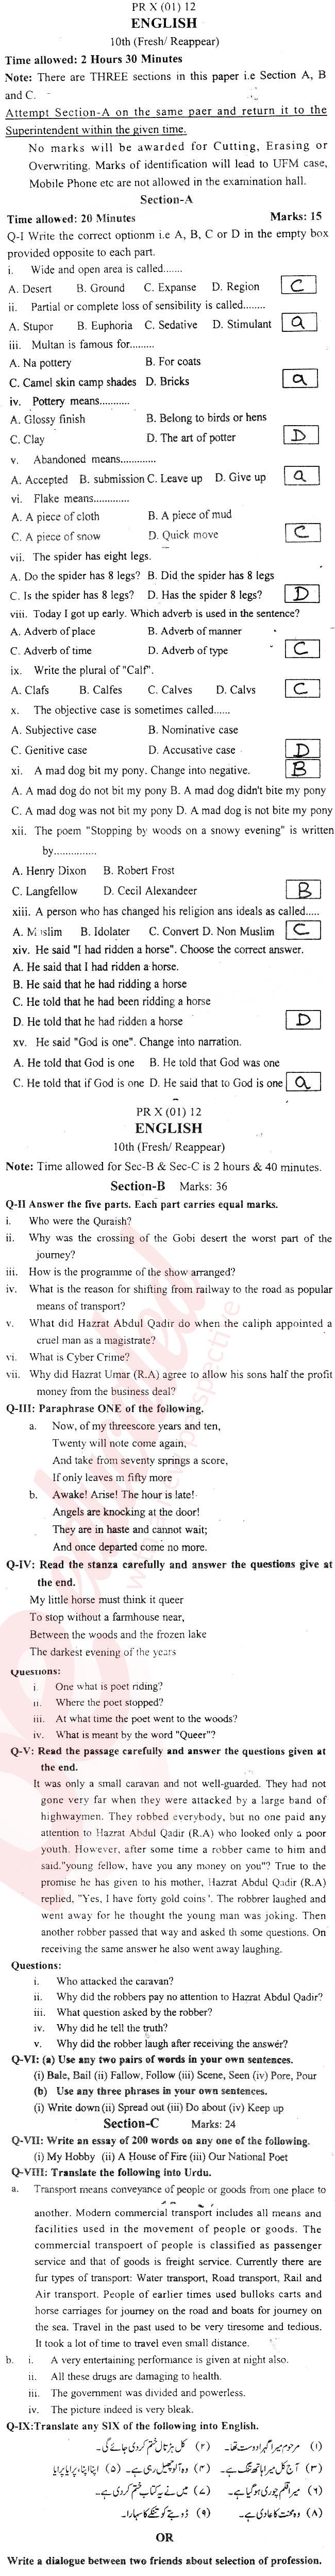 English 10th class Past Paper Group 1 BISE Mardan 2012